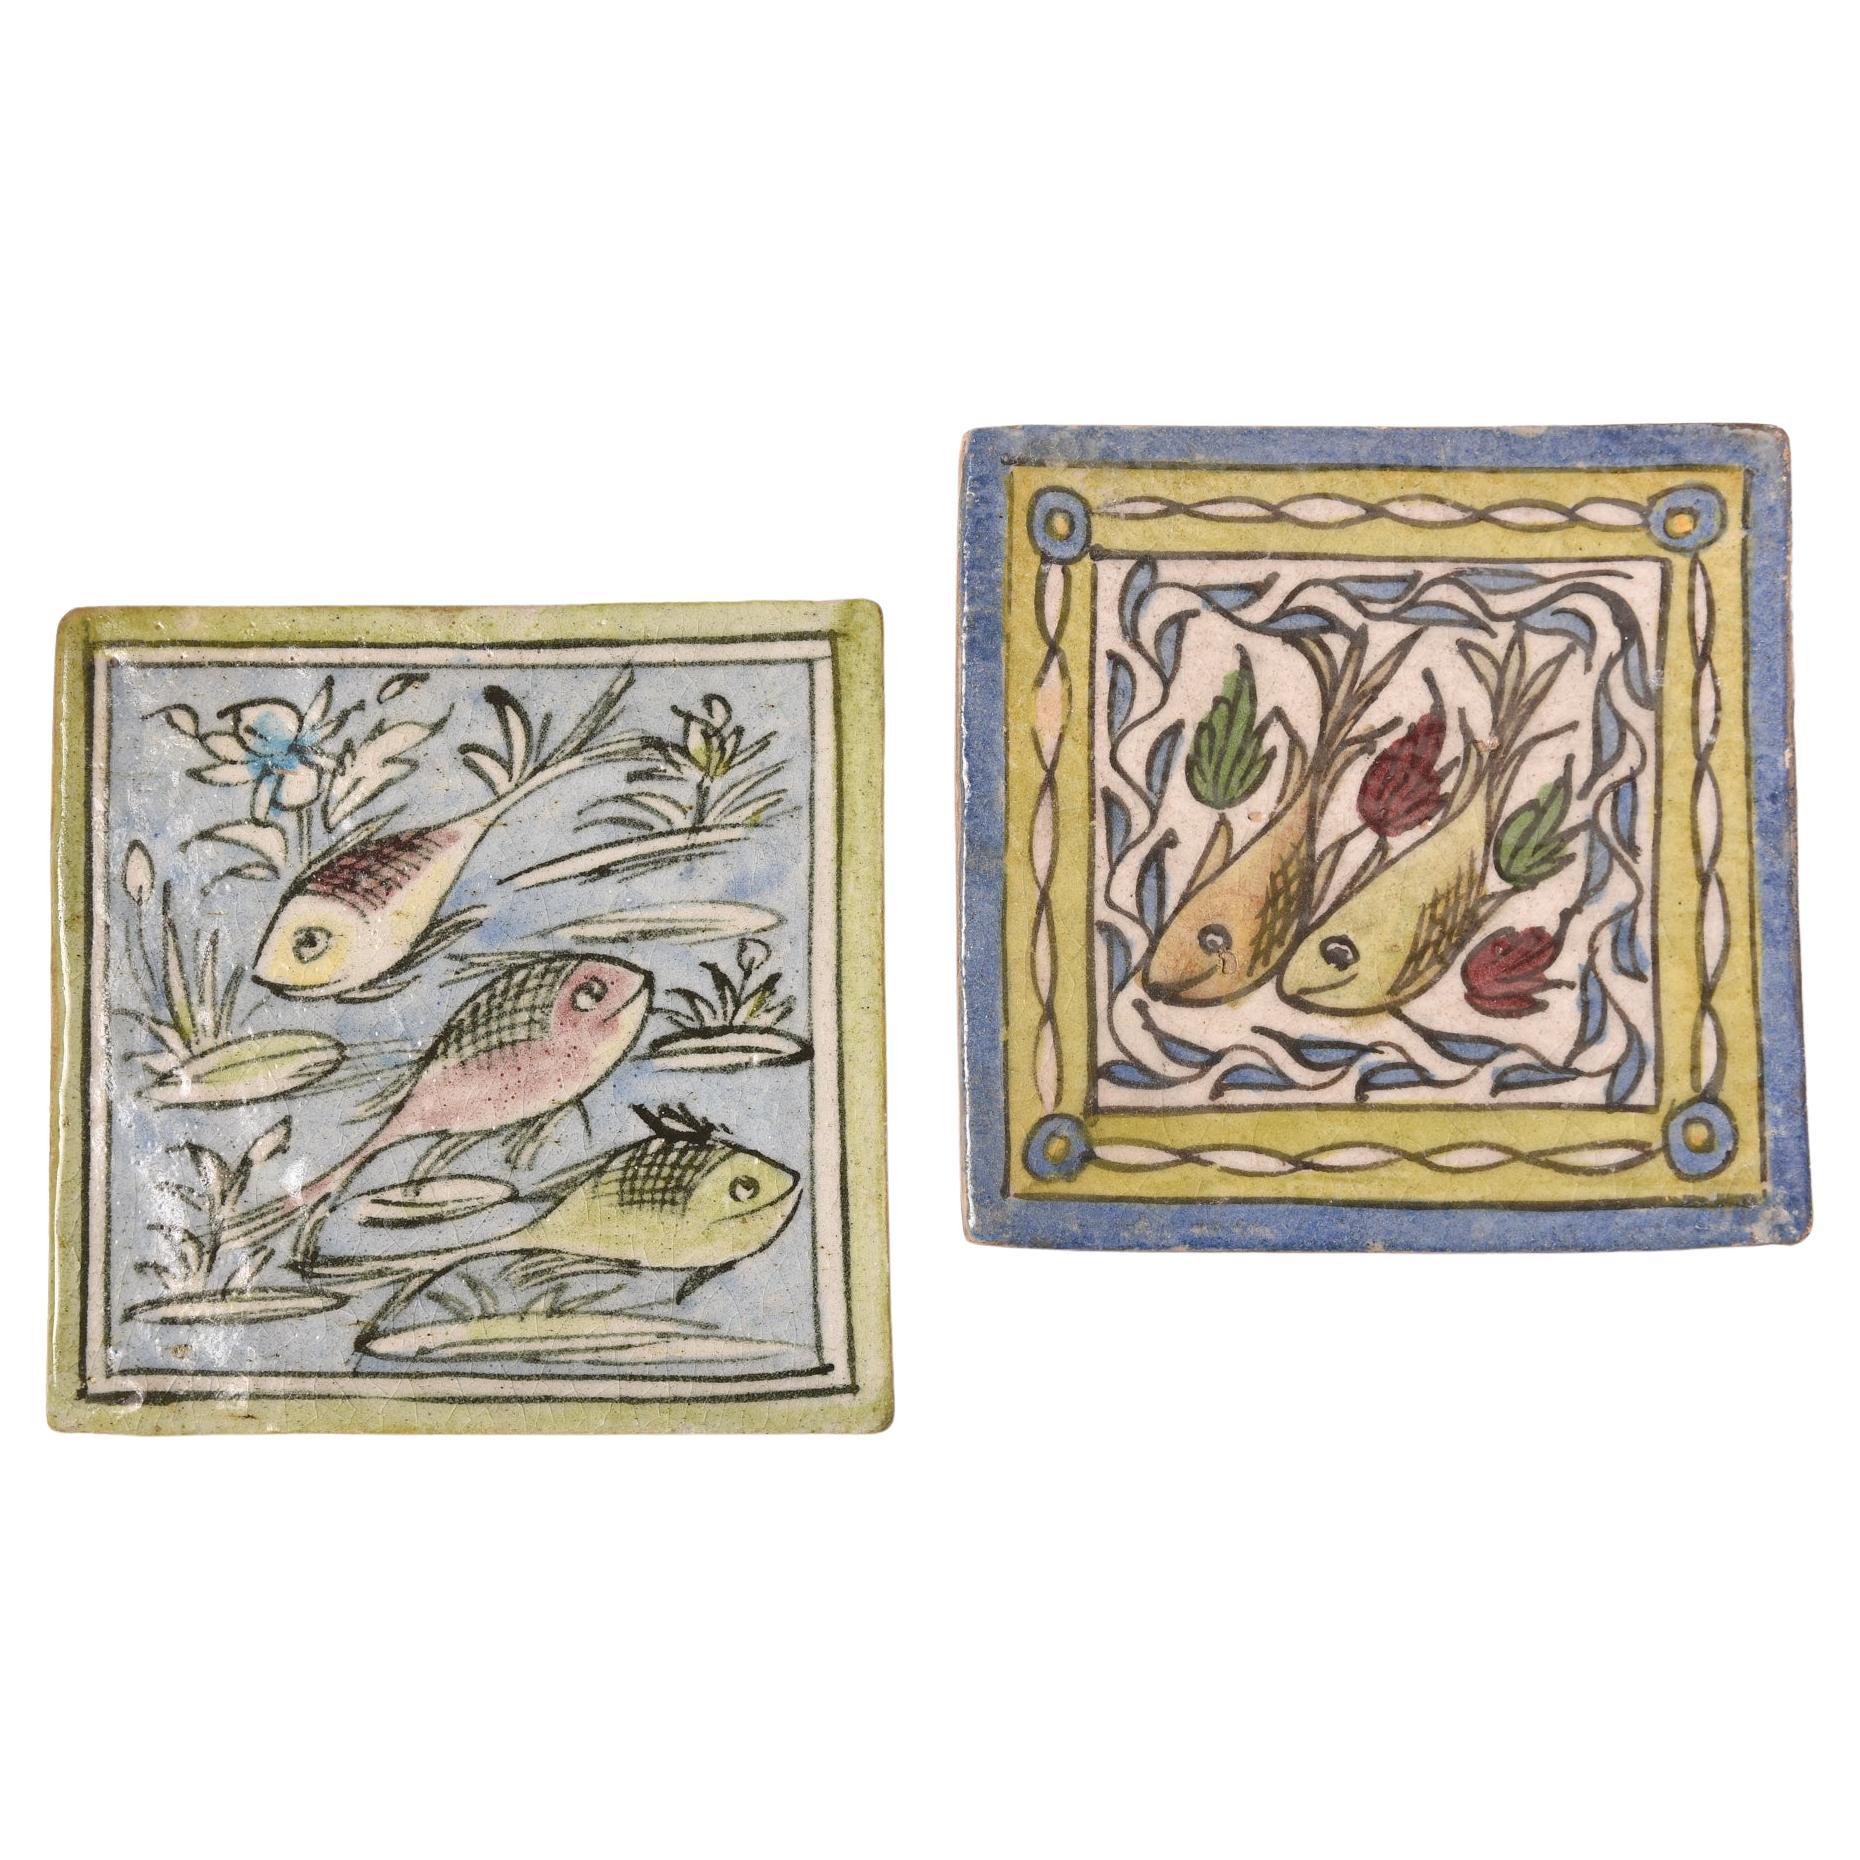 Old Hand Painted "Fish" Tiles  For Sale